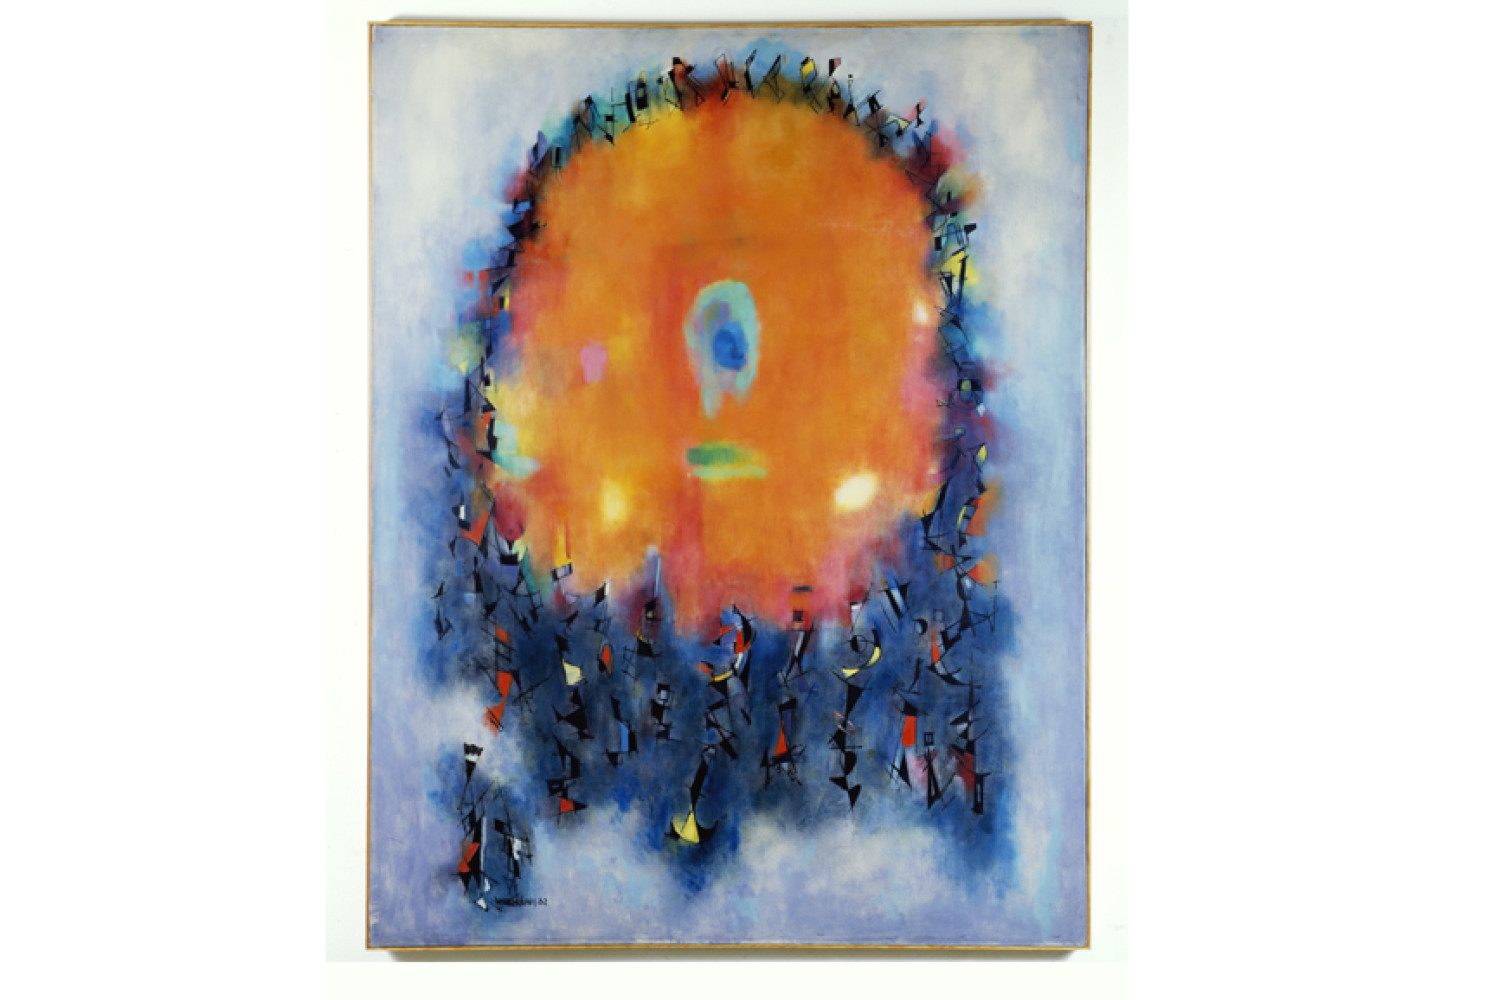 Bonfire, 1962, By Norman Lewis (American, 1909—1979); Oil on canvas; 64 x 49 7/8 inches; The Studio Museum in Harlem; Gift of the Estate of Norman Lewis; ©Estate of Norman W. Lewis; Image courtesy of Michael Rosenfeld Gallery LLC, New York, NY